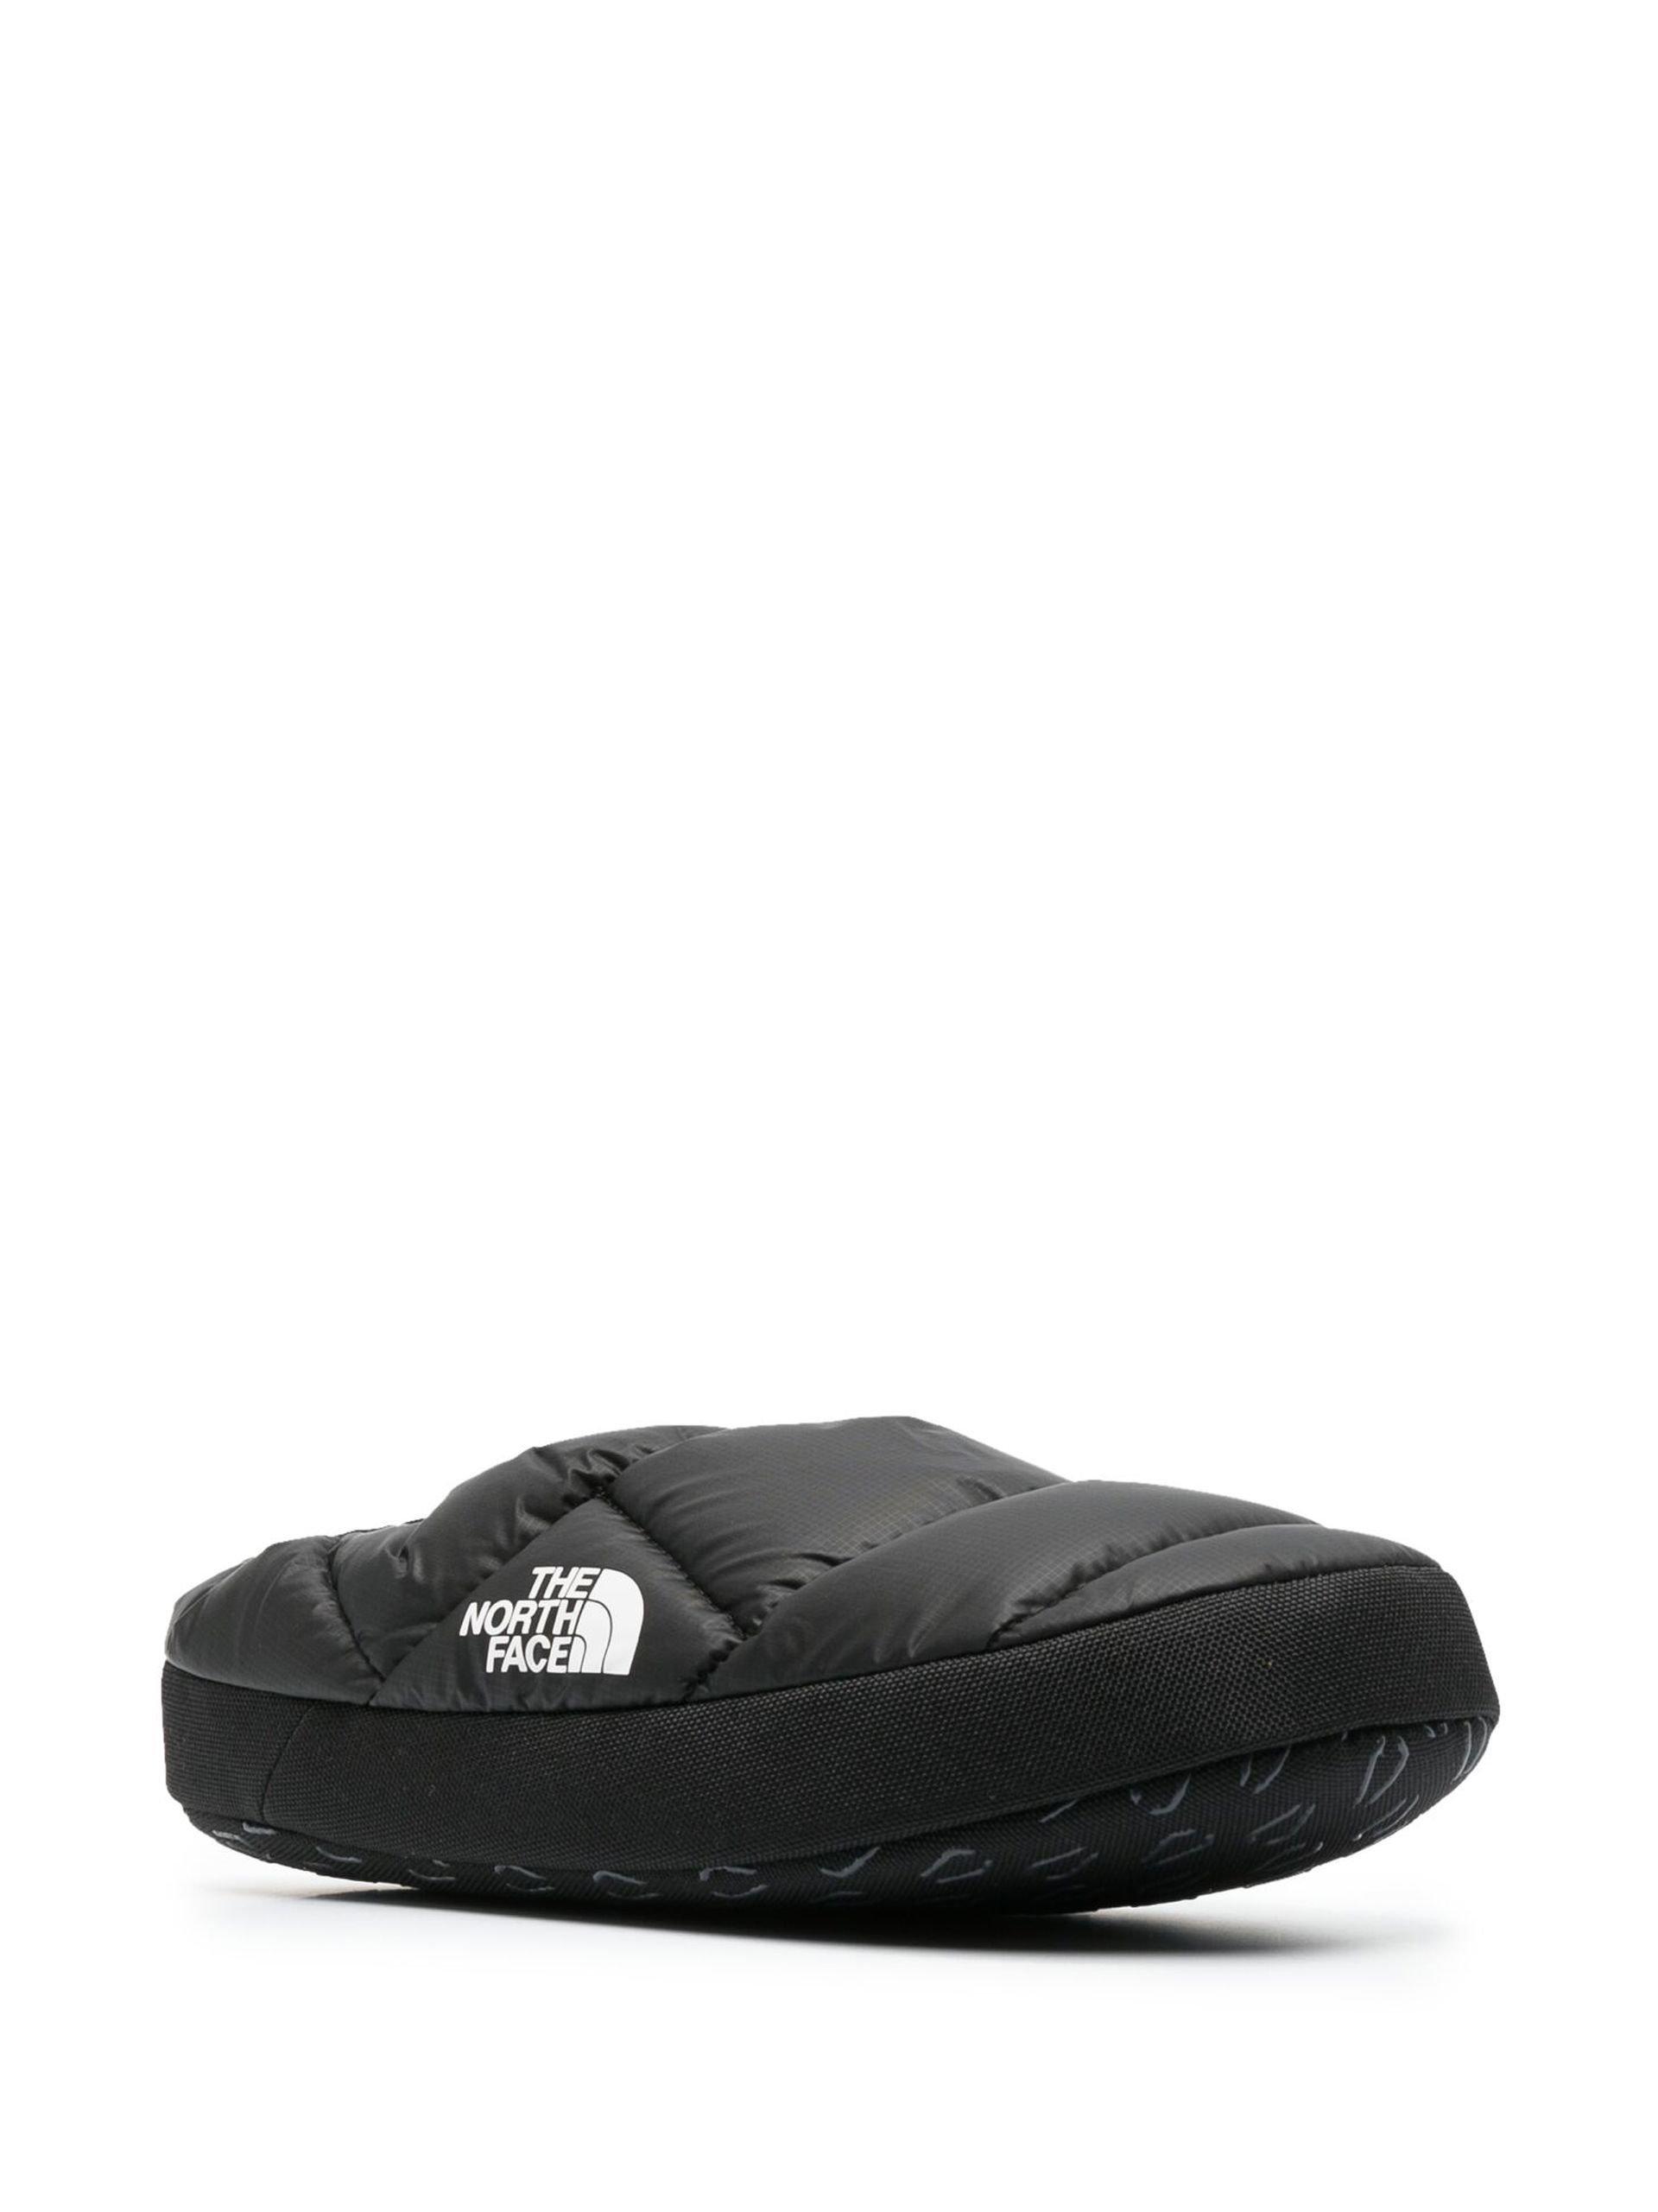 The North Face Black Nse Iii Tent Winter Mule Slippers for Men | Lyst